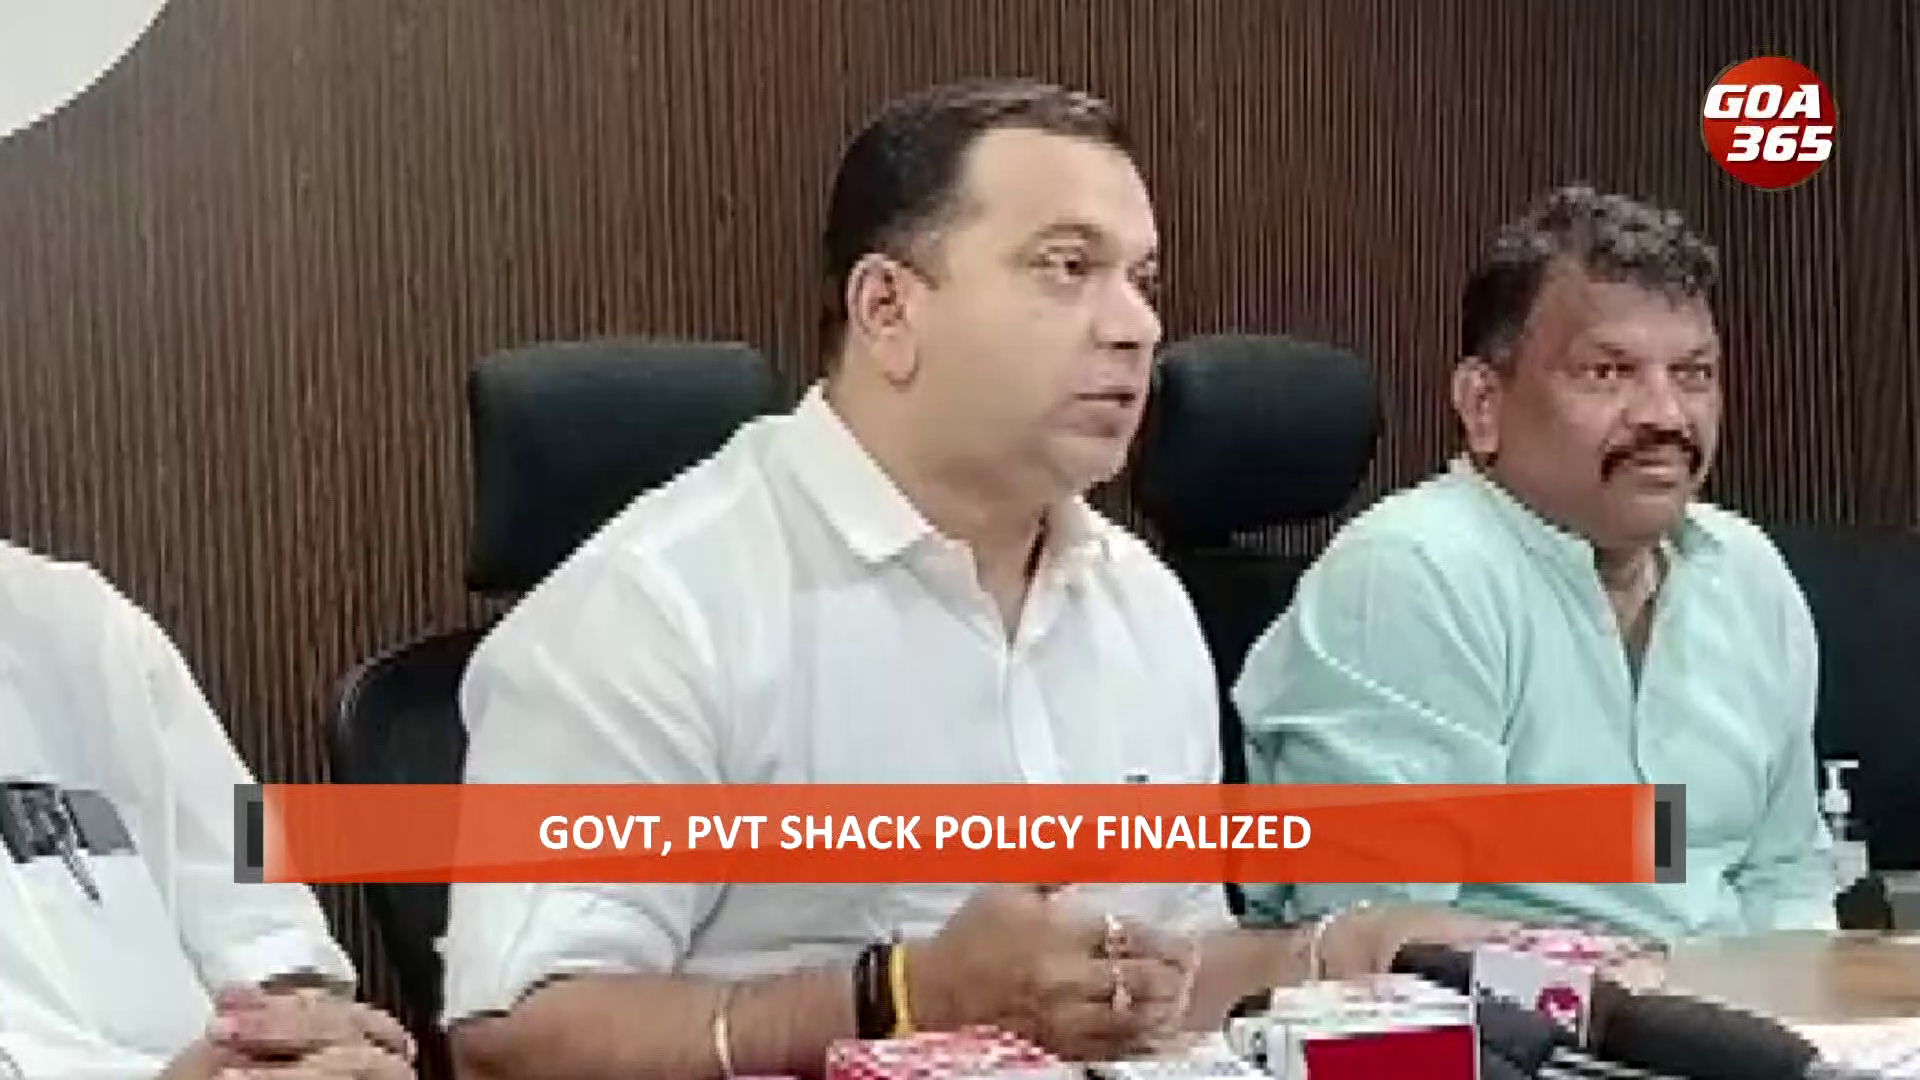 Here are the big revisions made to the Goan Shack Policy by Tourism Min Khaunte || ENGLISH || GOA365 